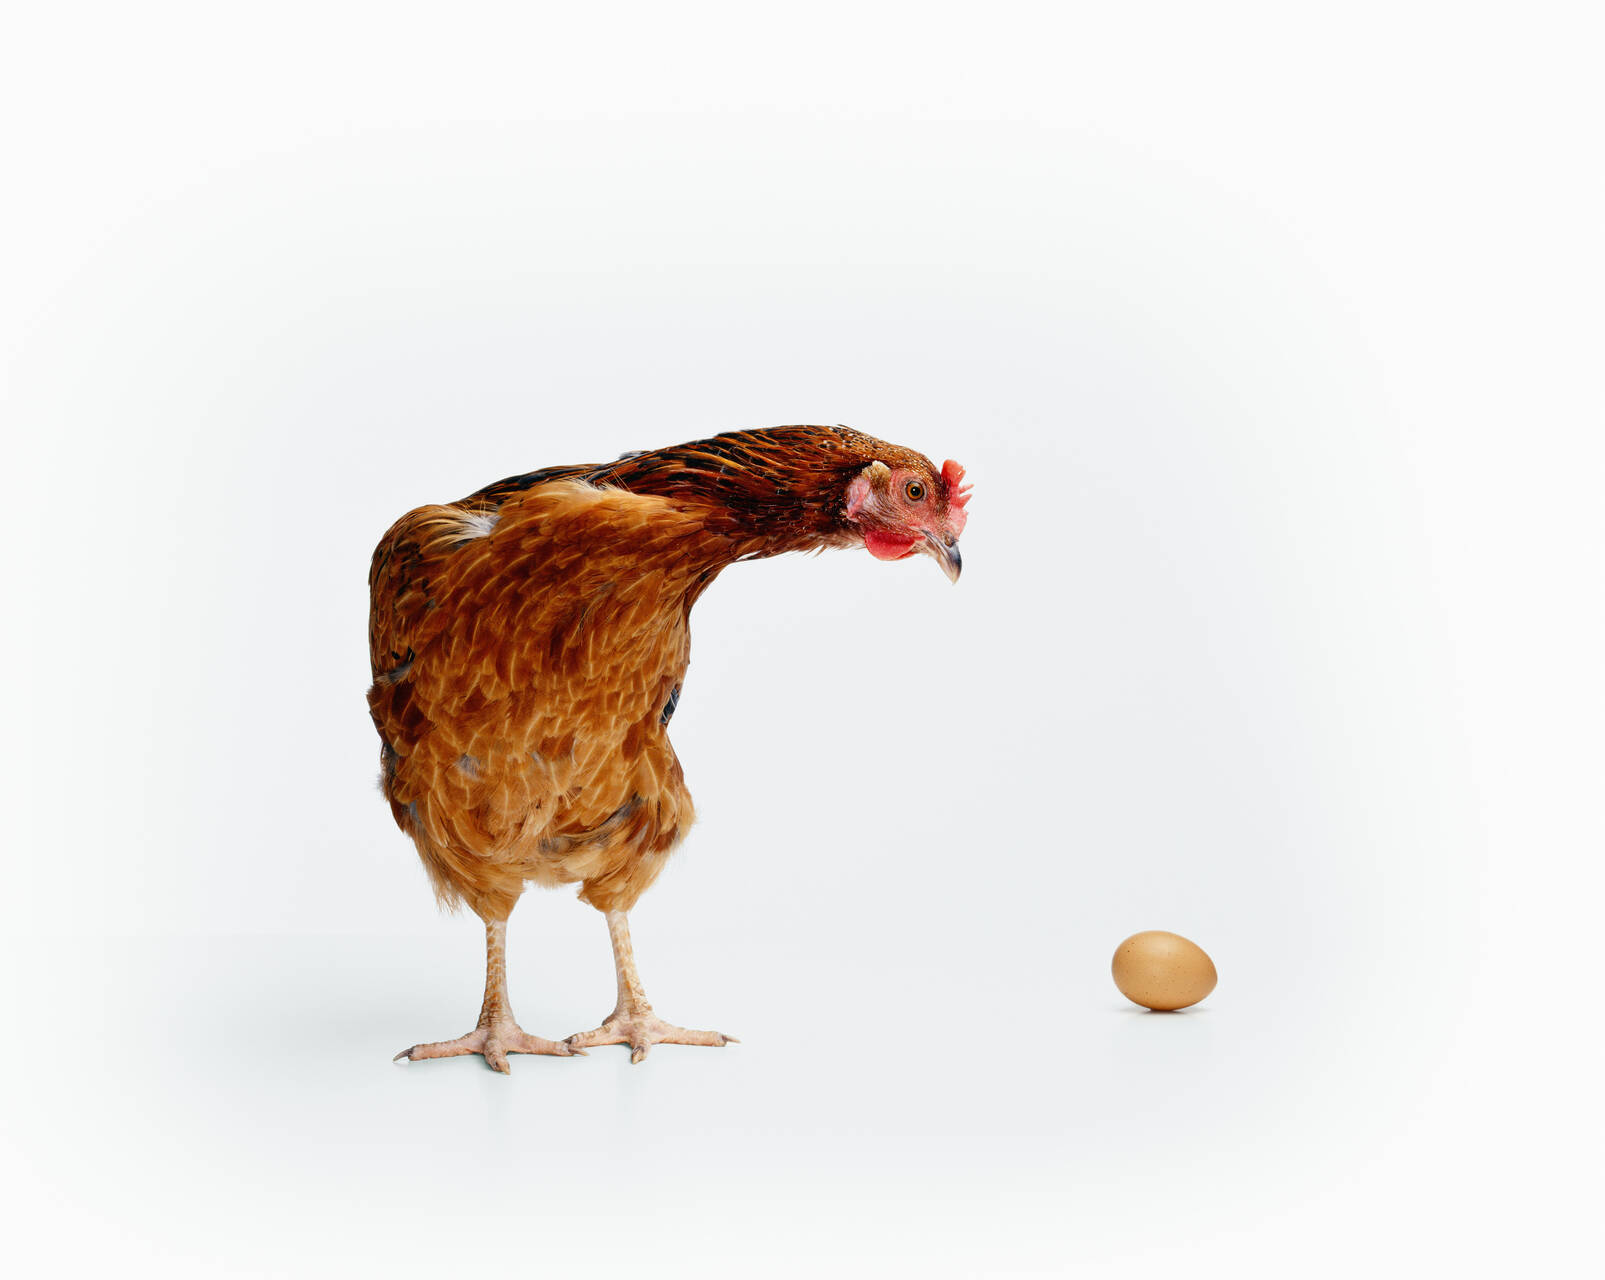 Chicken or Egg GettyImages 200161245.jpg